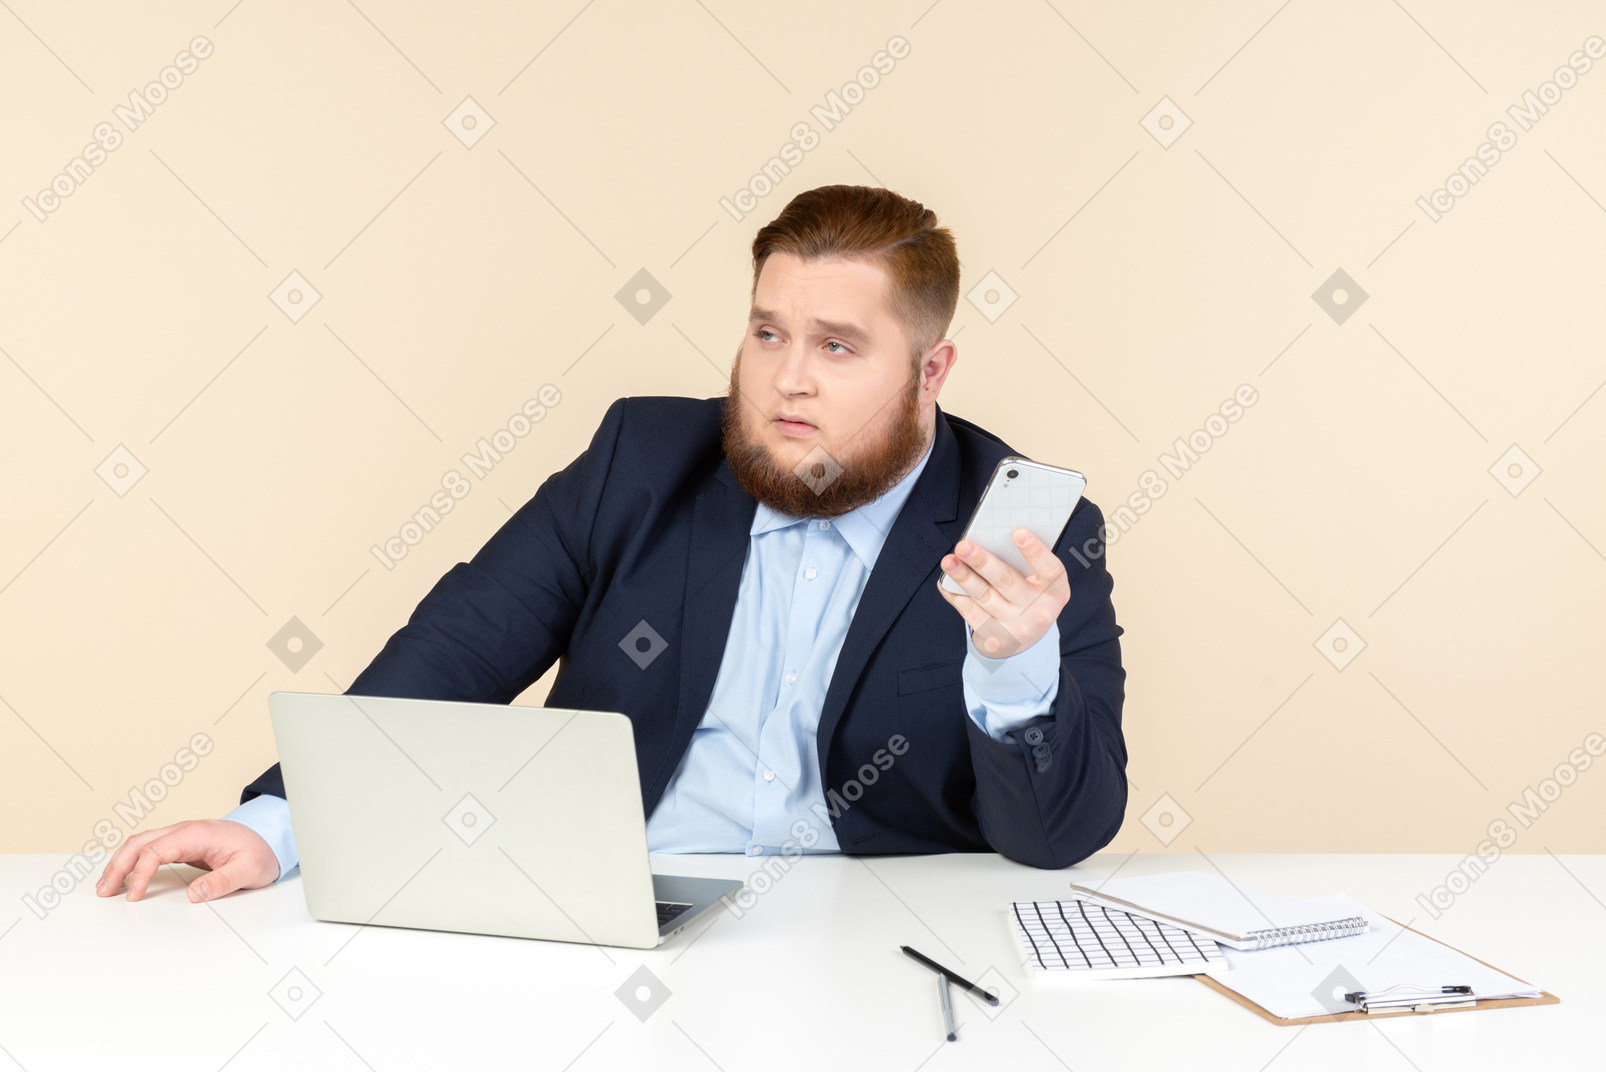 Pensive young overweight man sitting at the office desk and holding phone